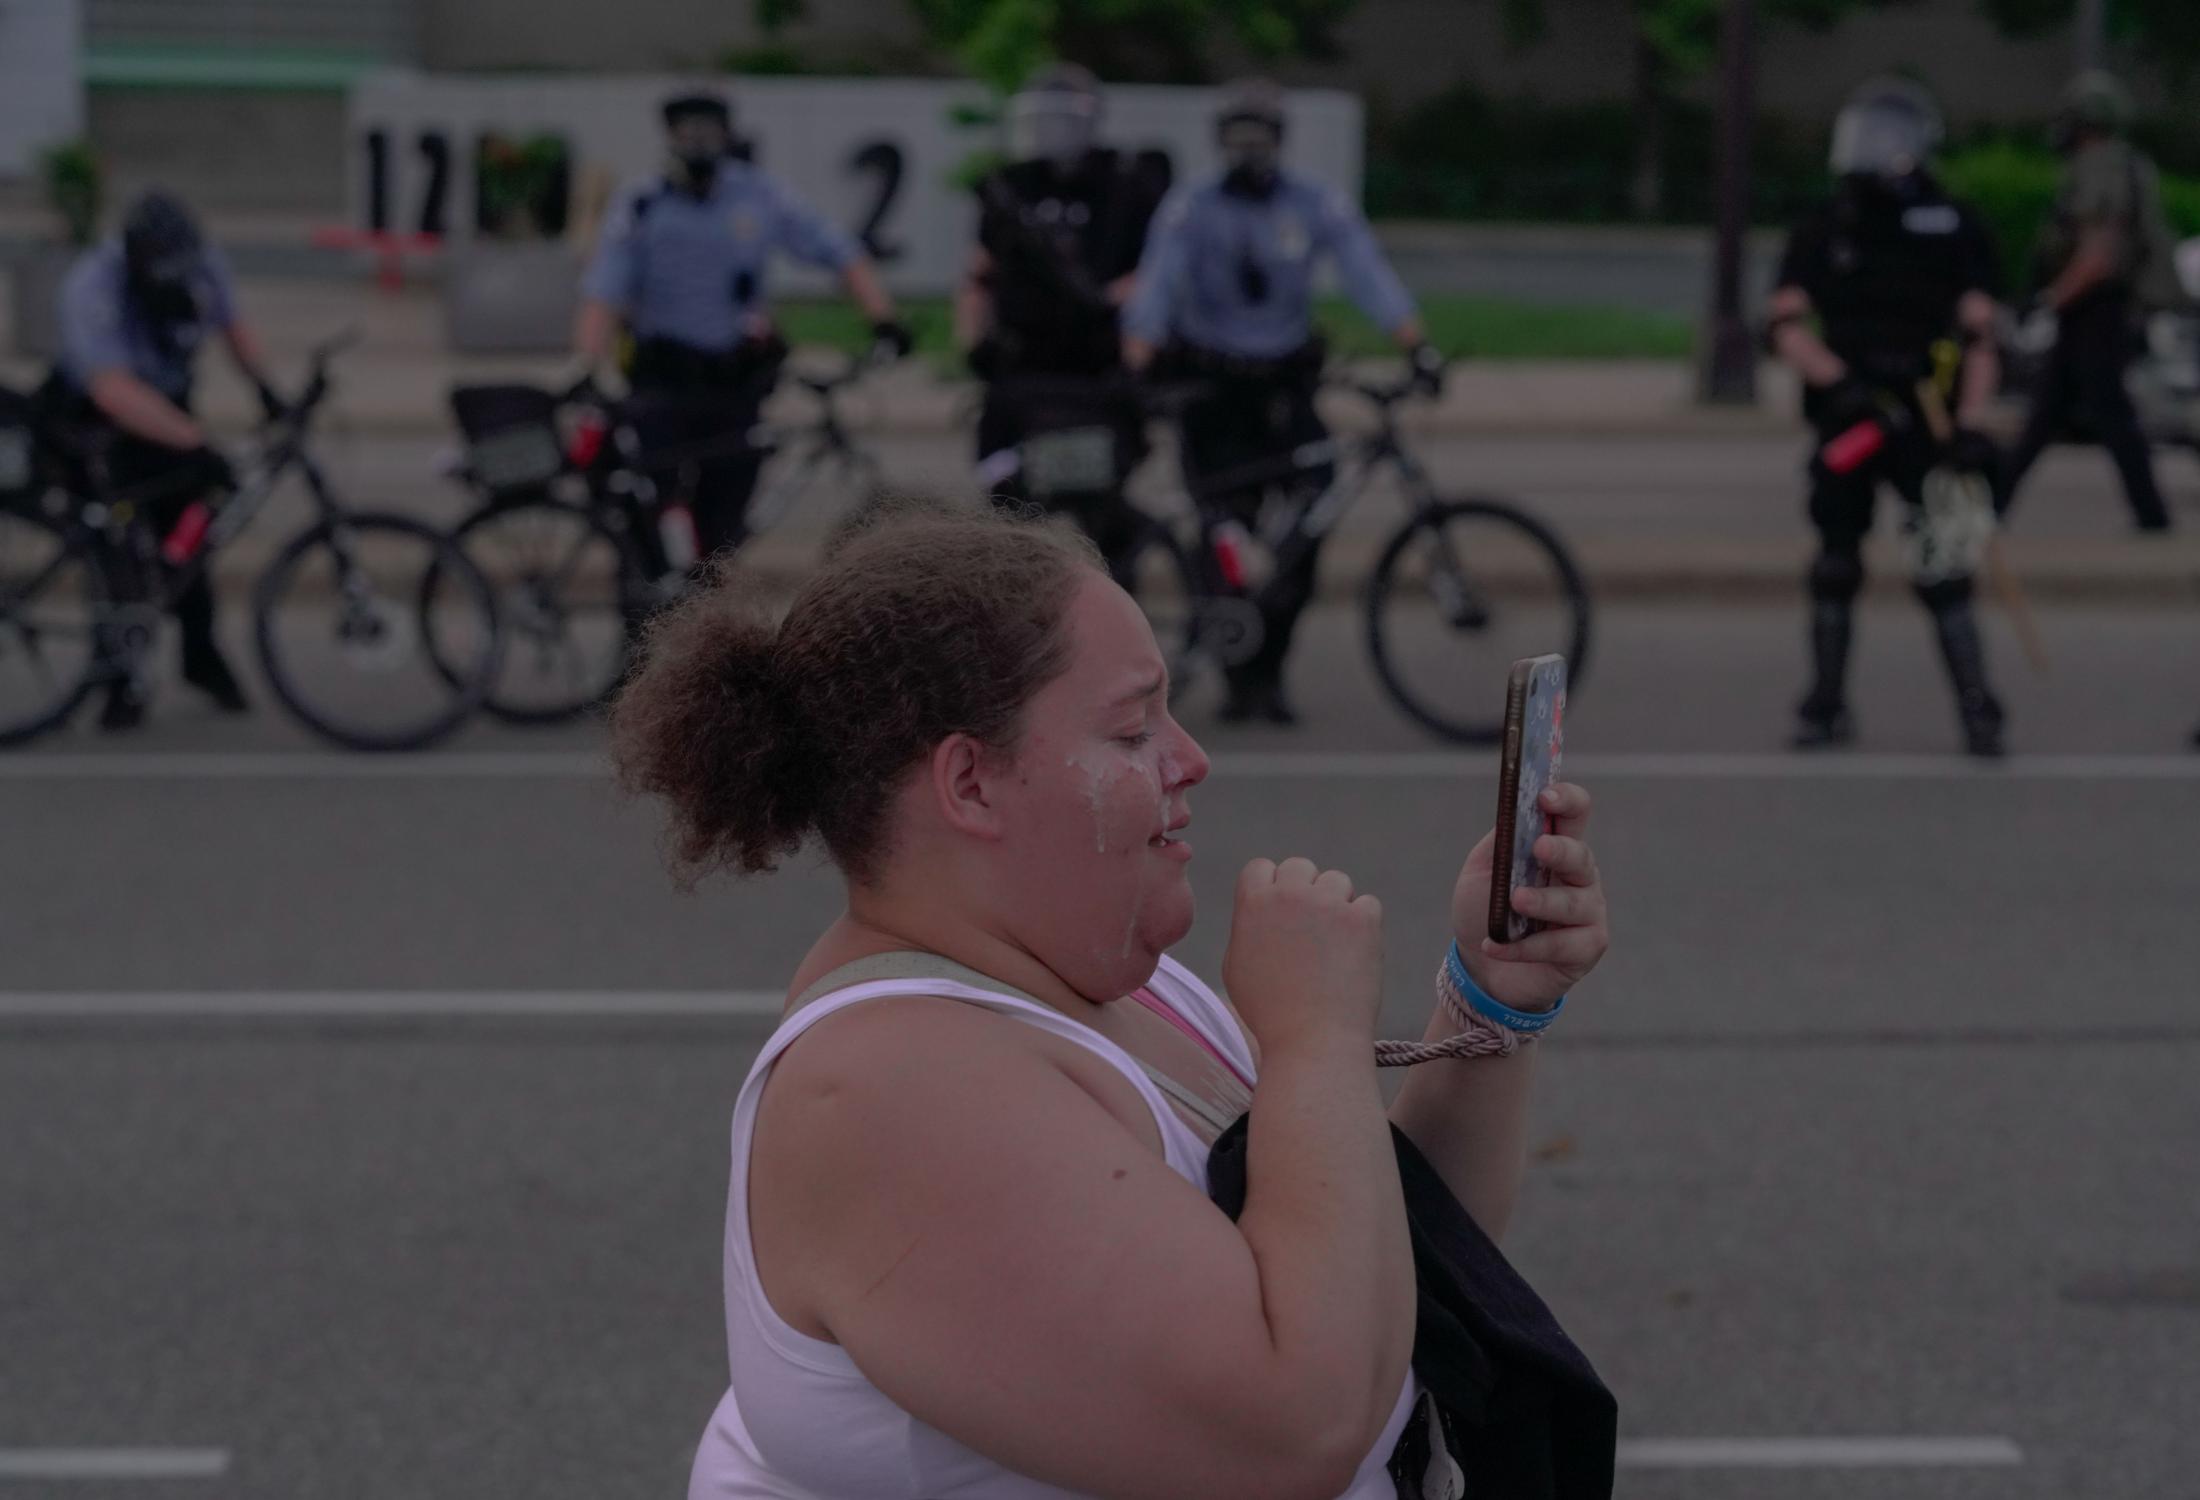 The BLM Summer - A woman who has been pepper sprayed walks by a group of...